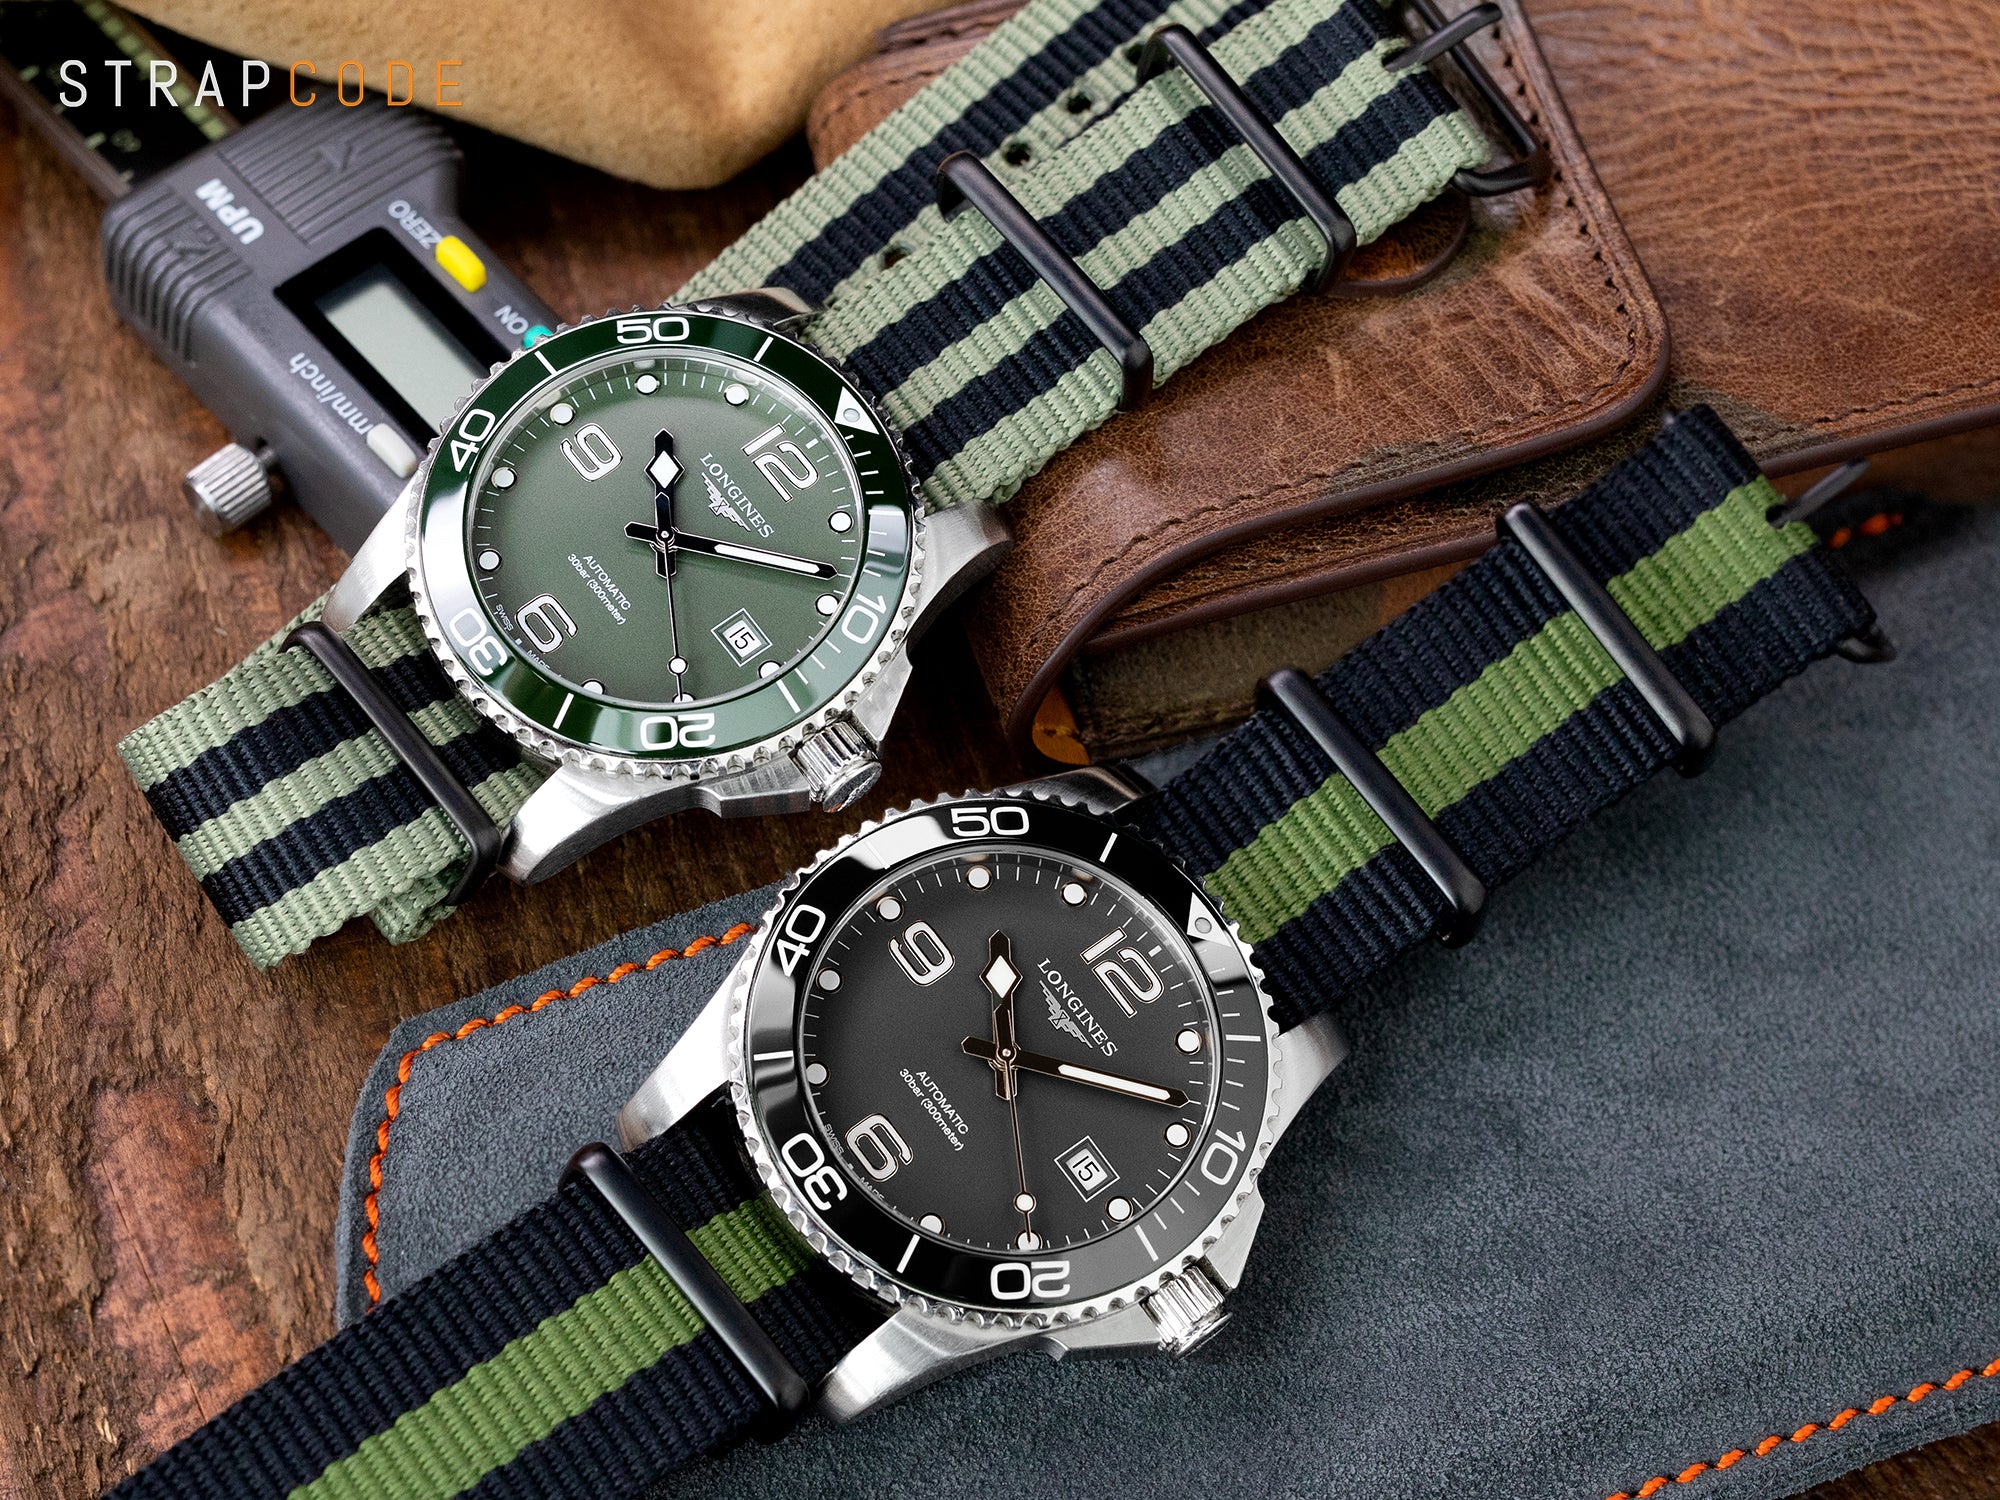 Military green tone NATO watch straps are essential accessory for professional settings for the two Longines automatic watches